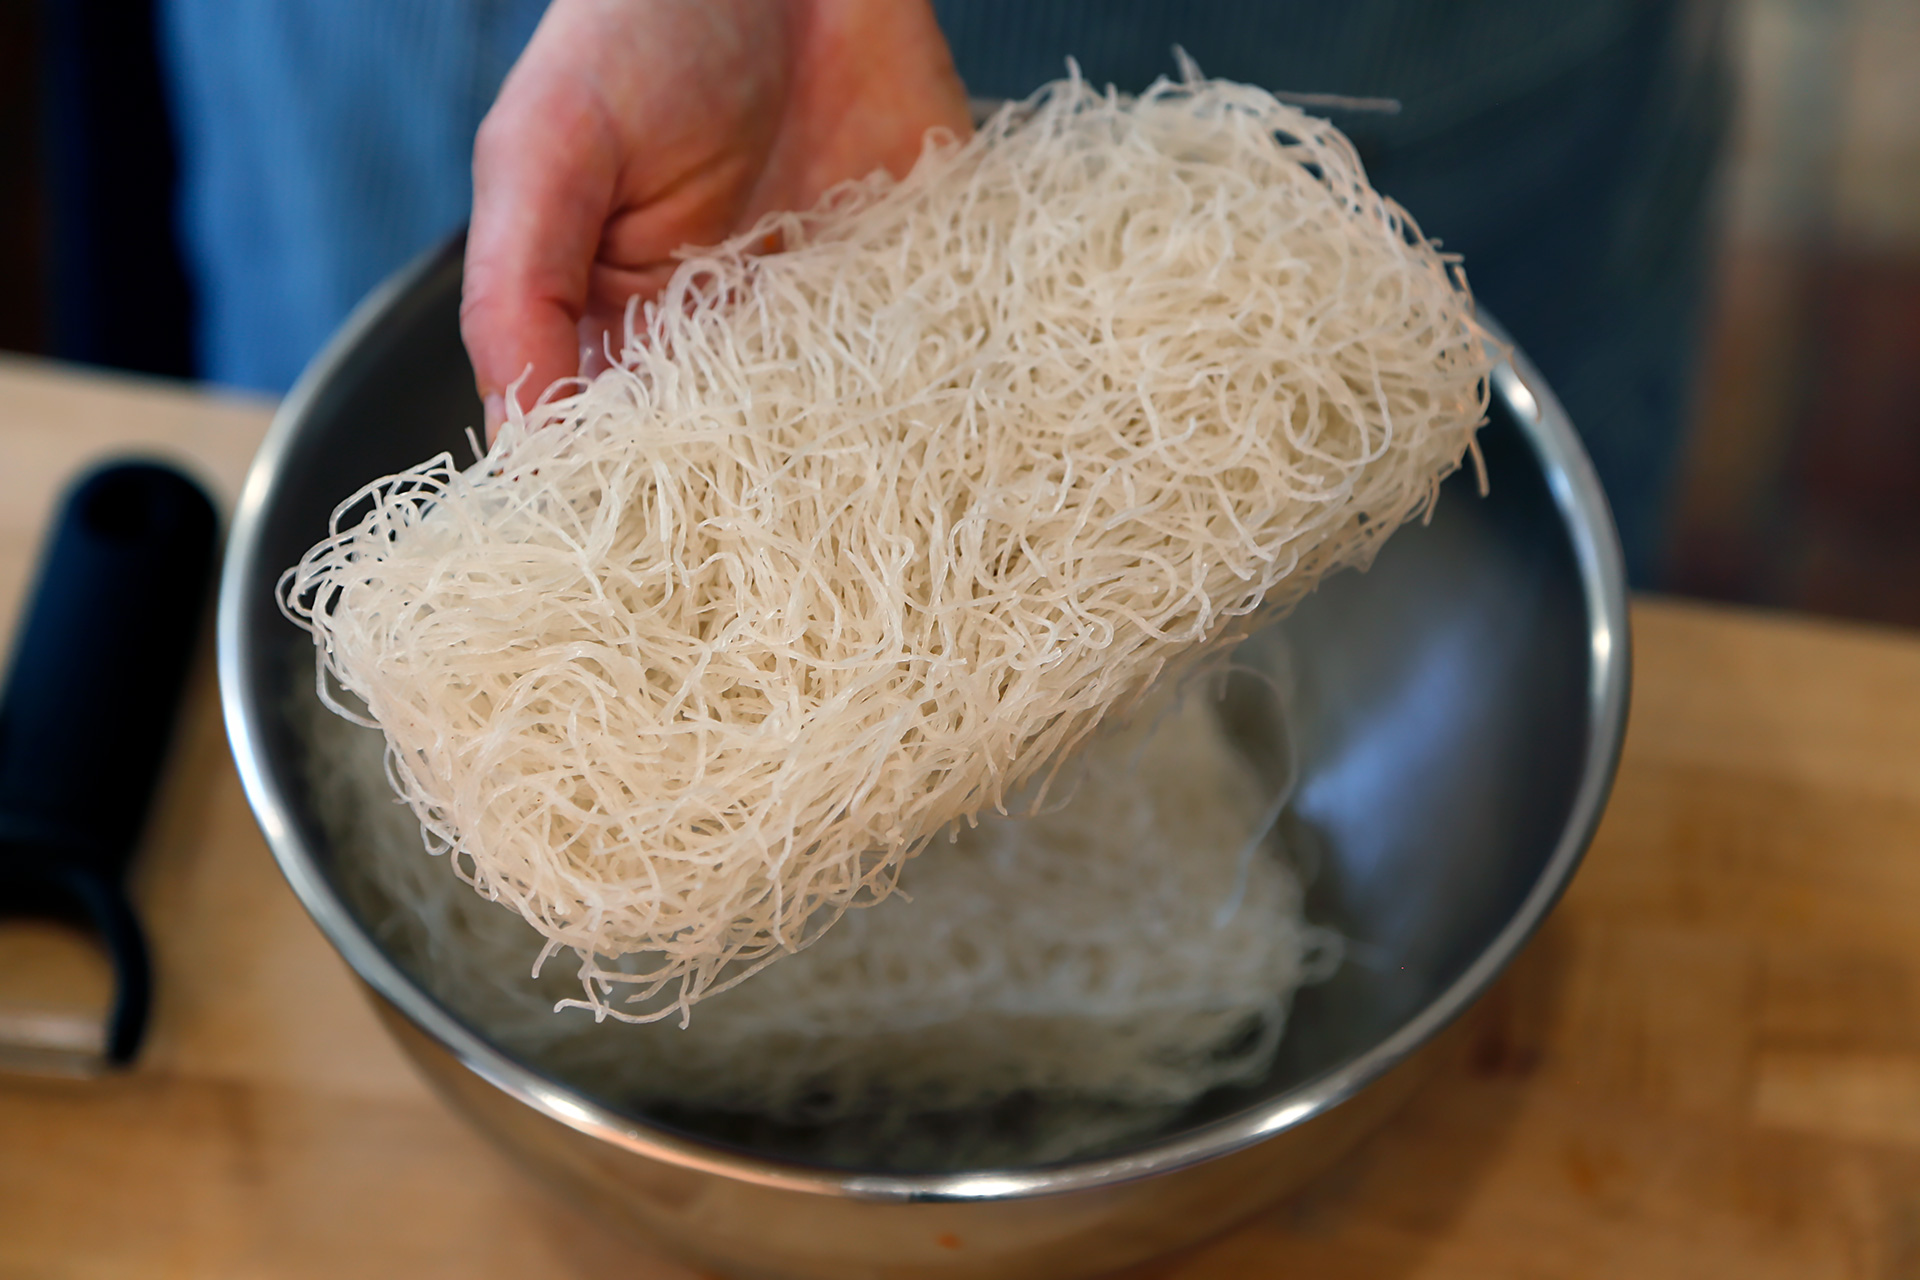 Cook the noodles according to package directions. Drain in a colander, rinsing well with cold water. Drain well again.